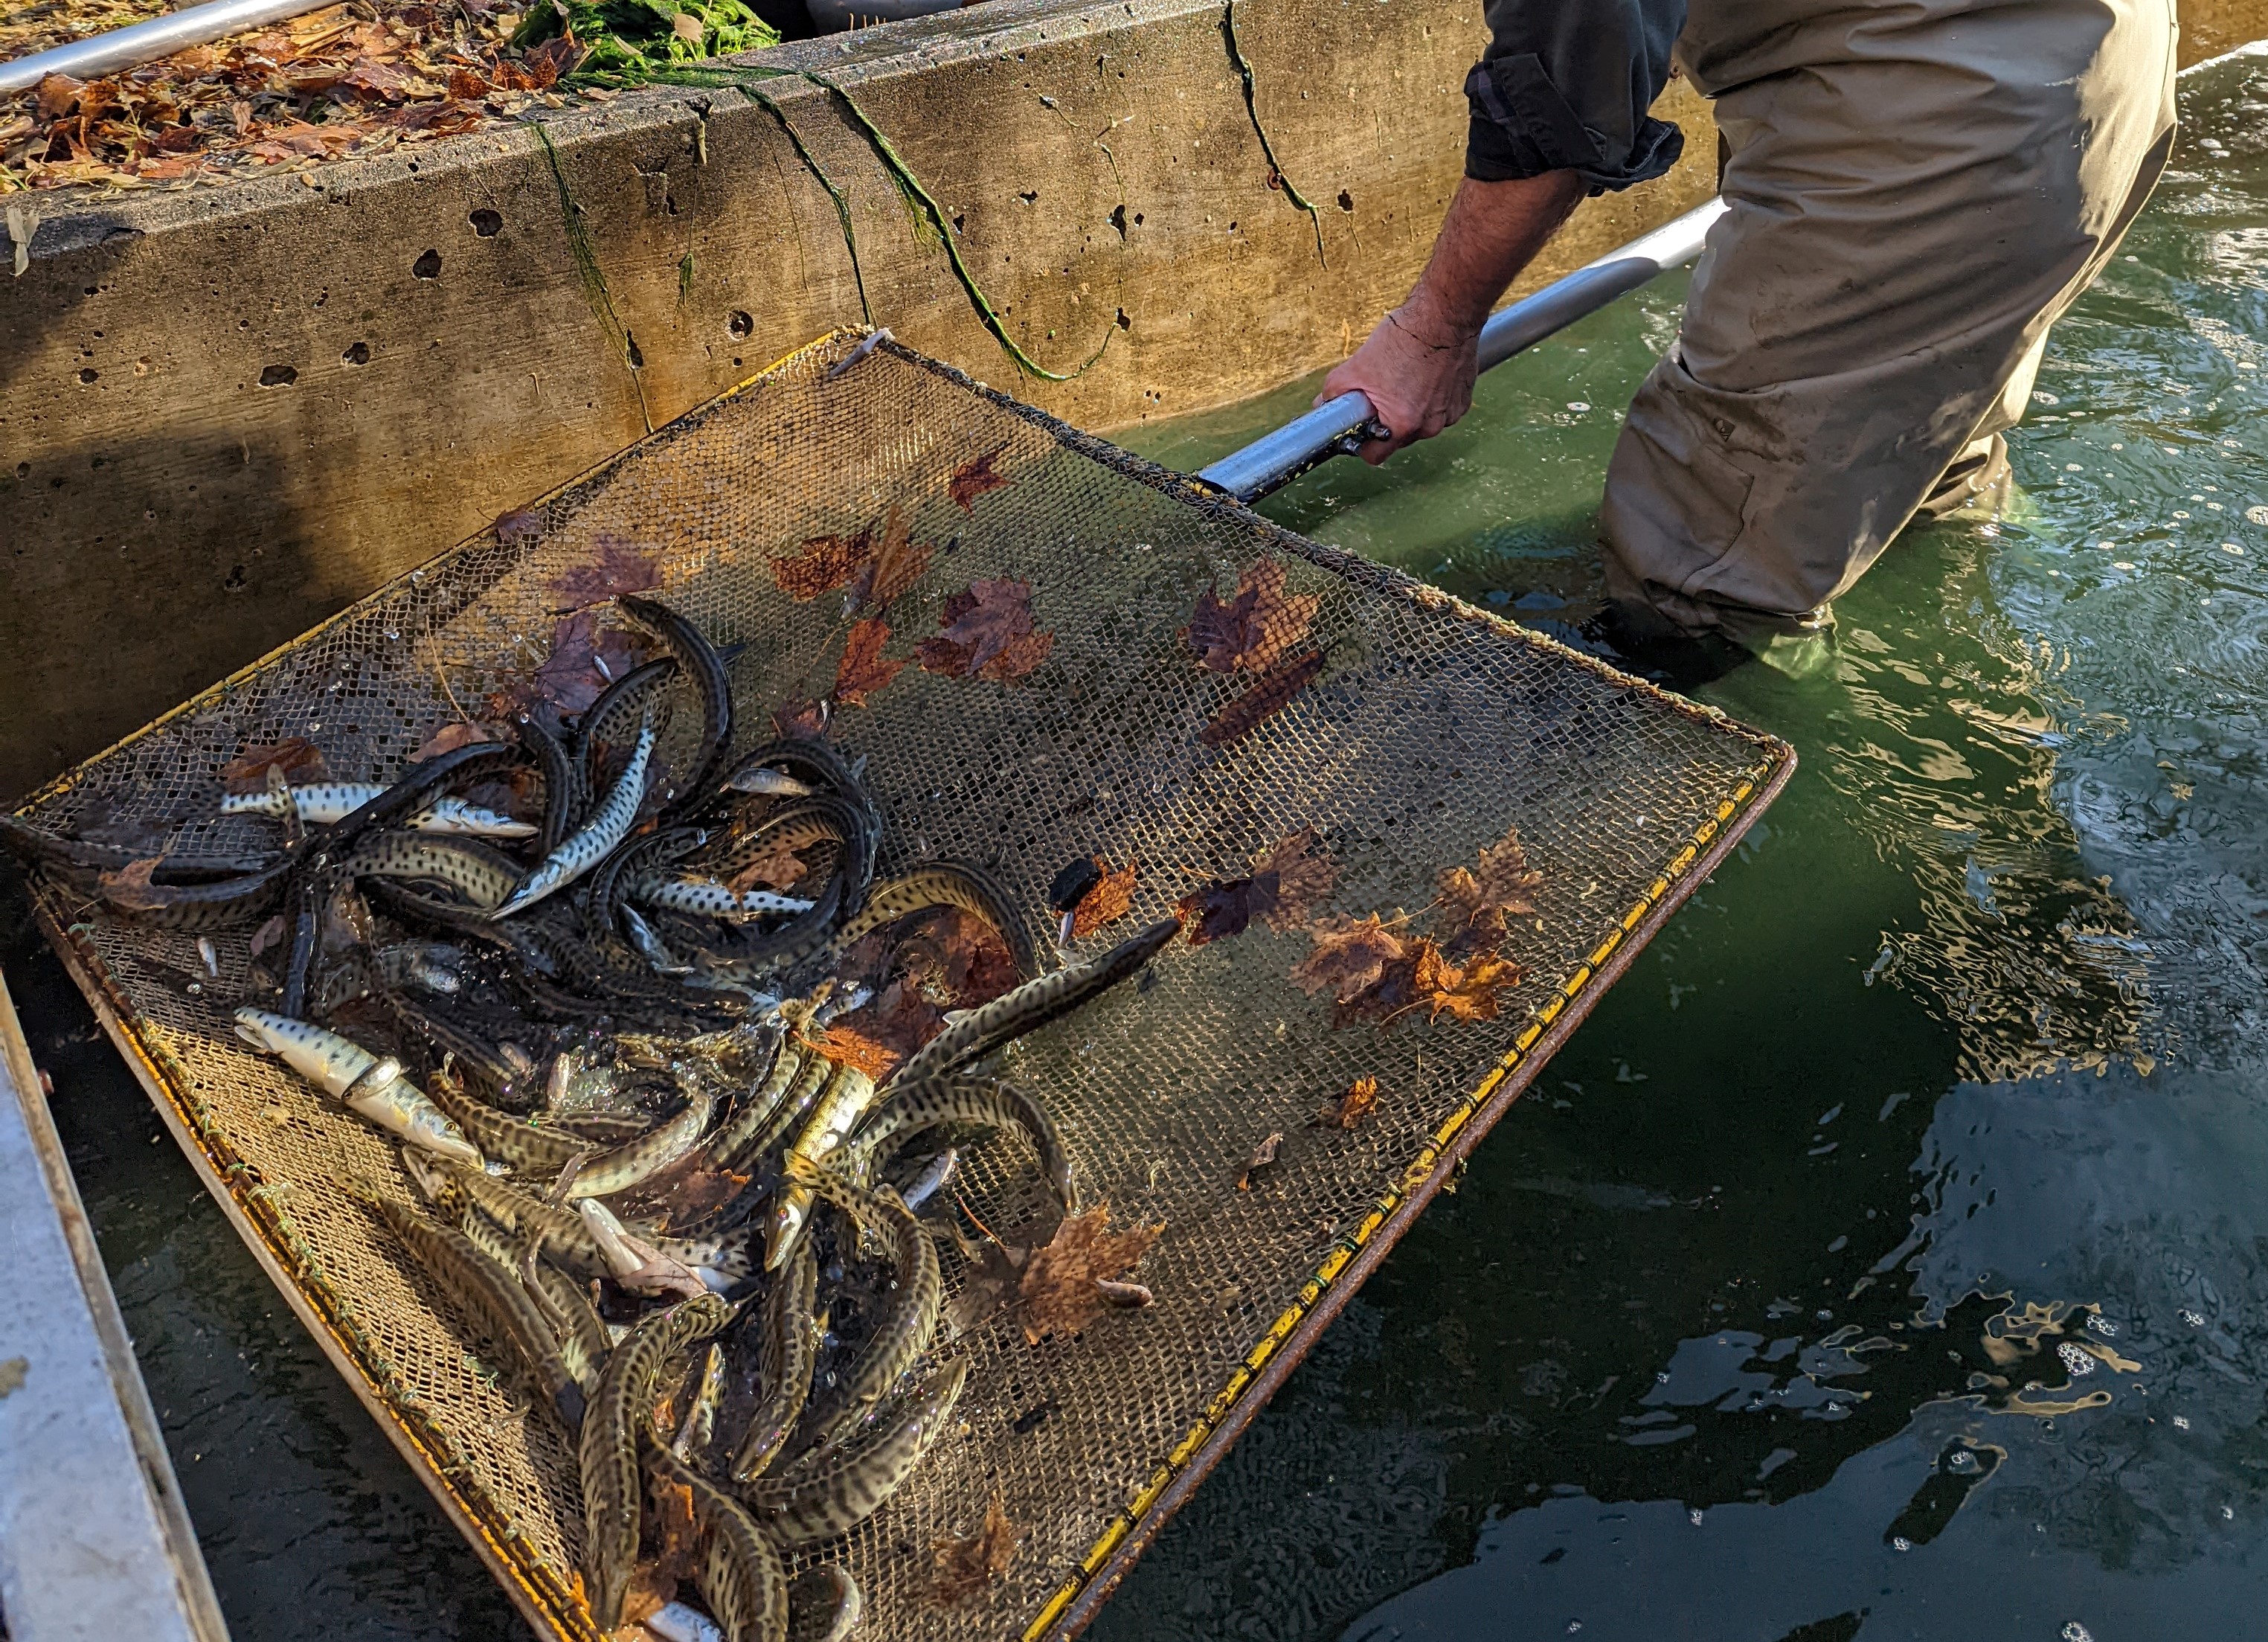 DNR stocked Michigan waters with 7.8 tons of fish in fall 2022